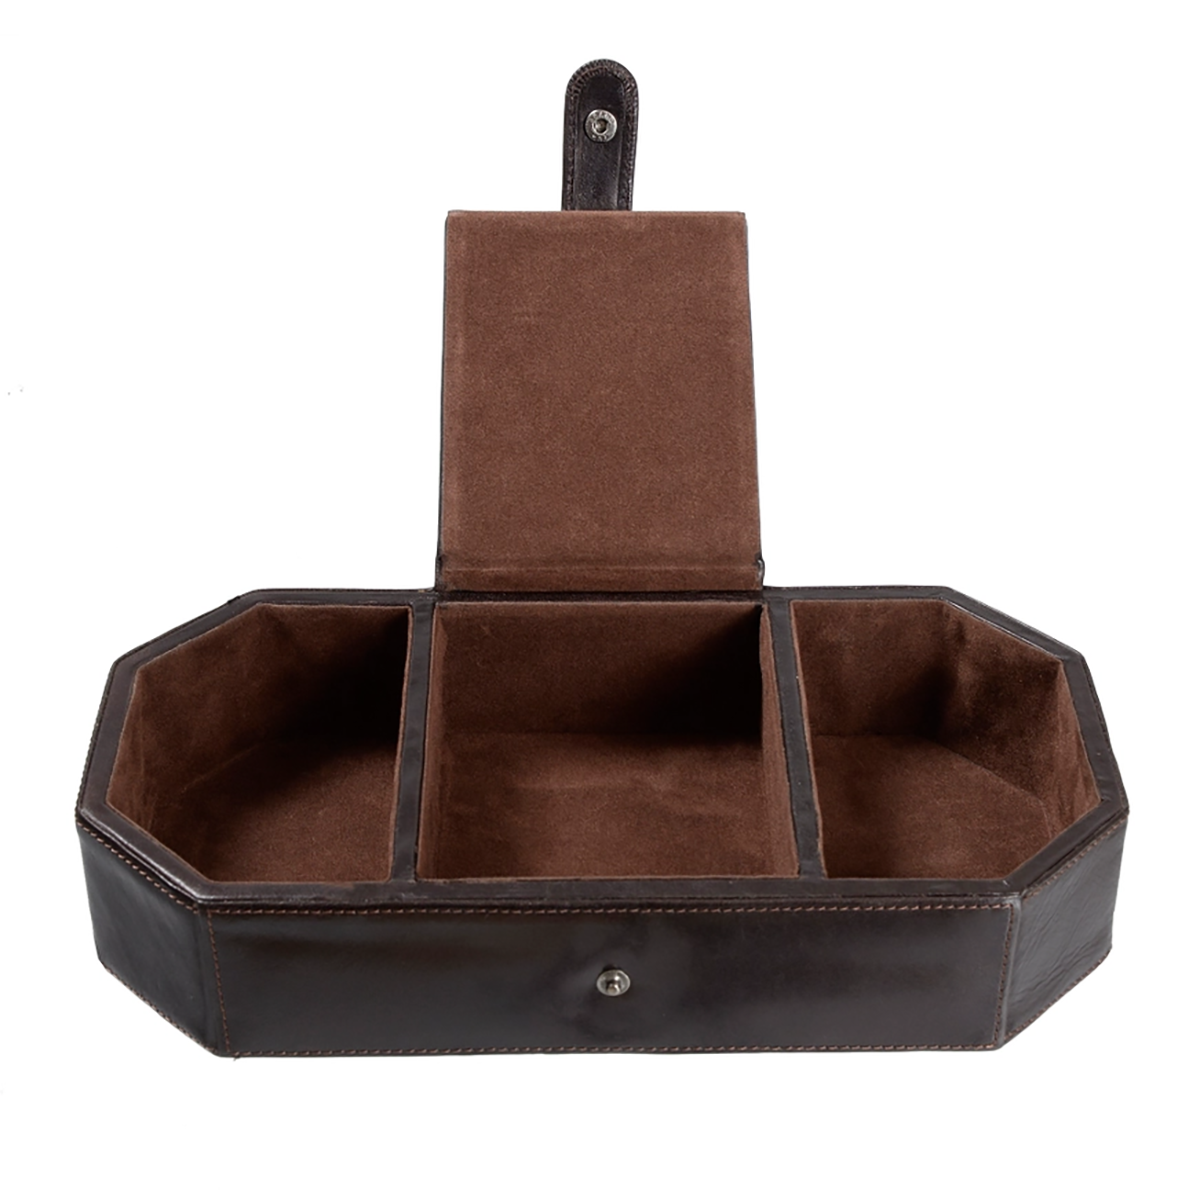 Leather Desk Caddy